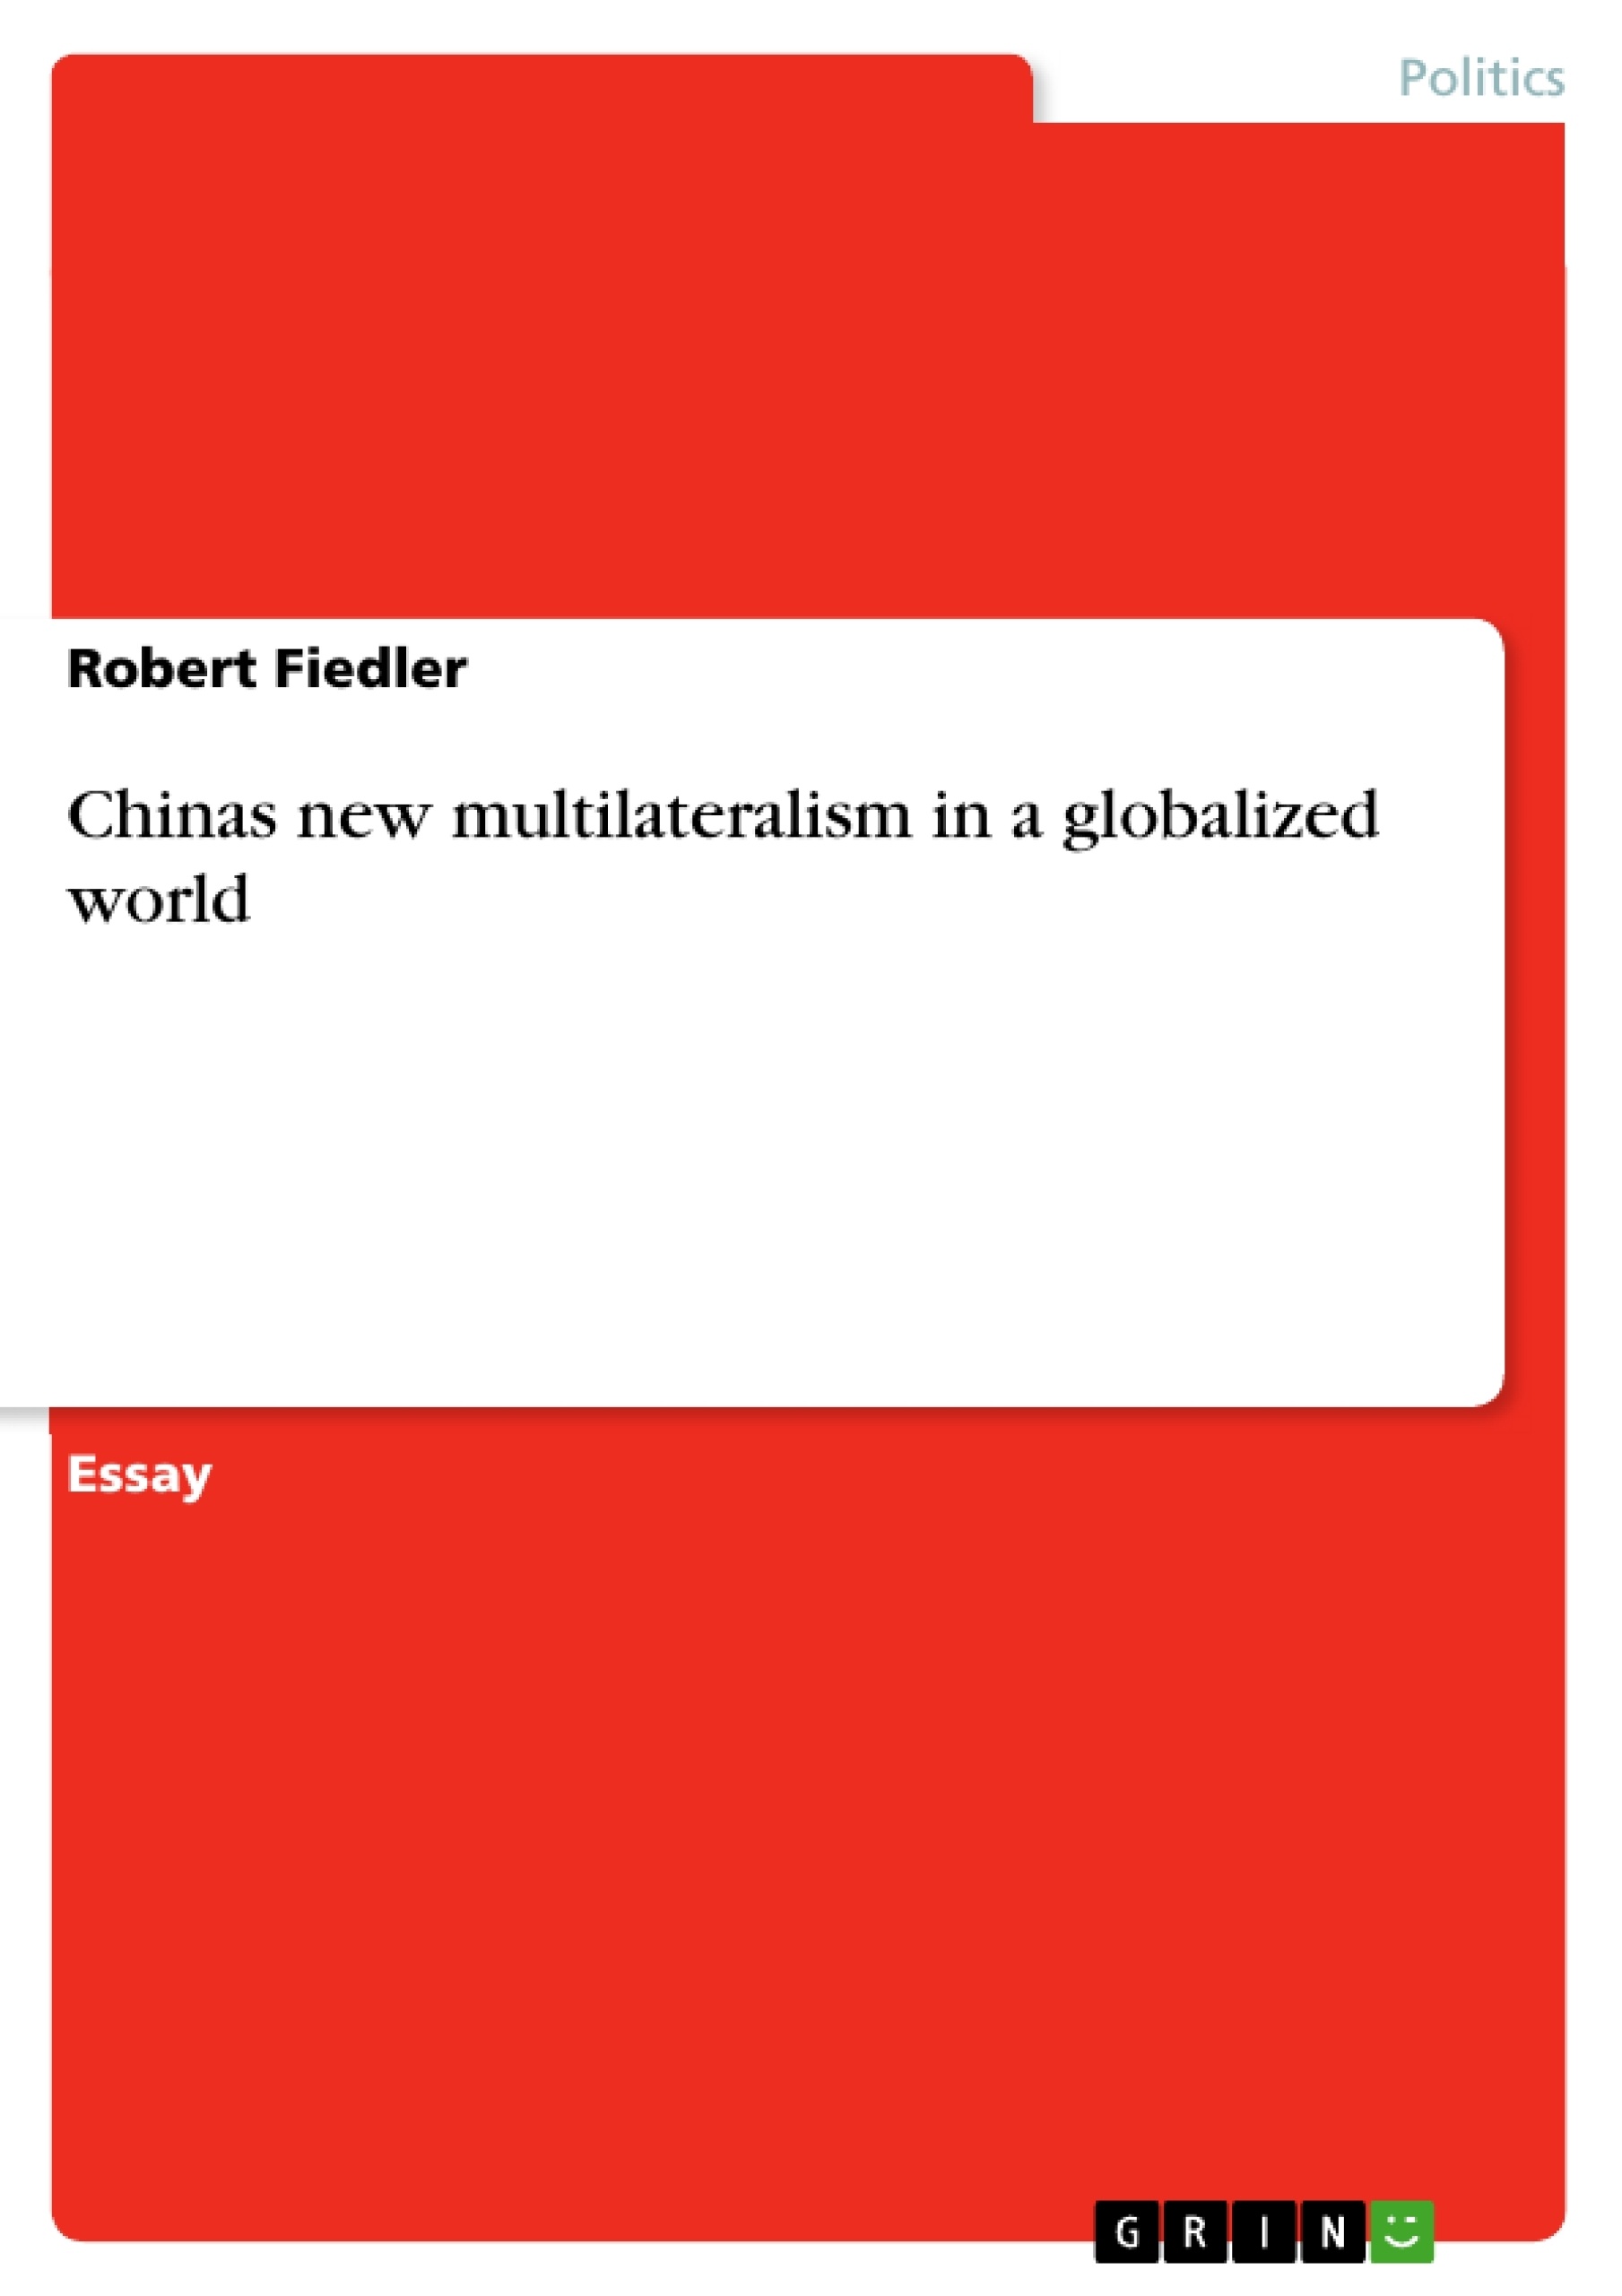 Title: Chinas new multilateralism in a globalized world